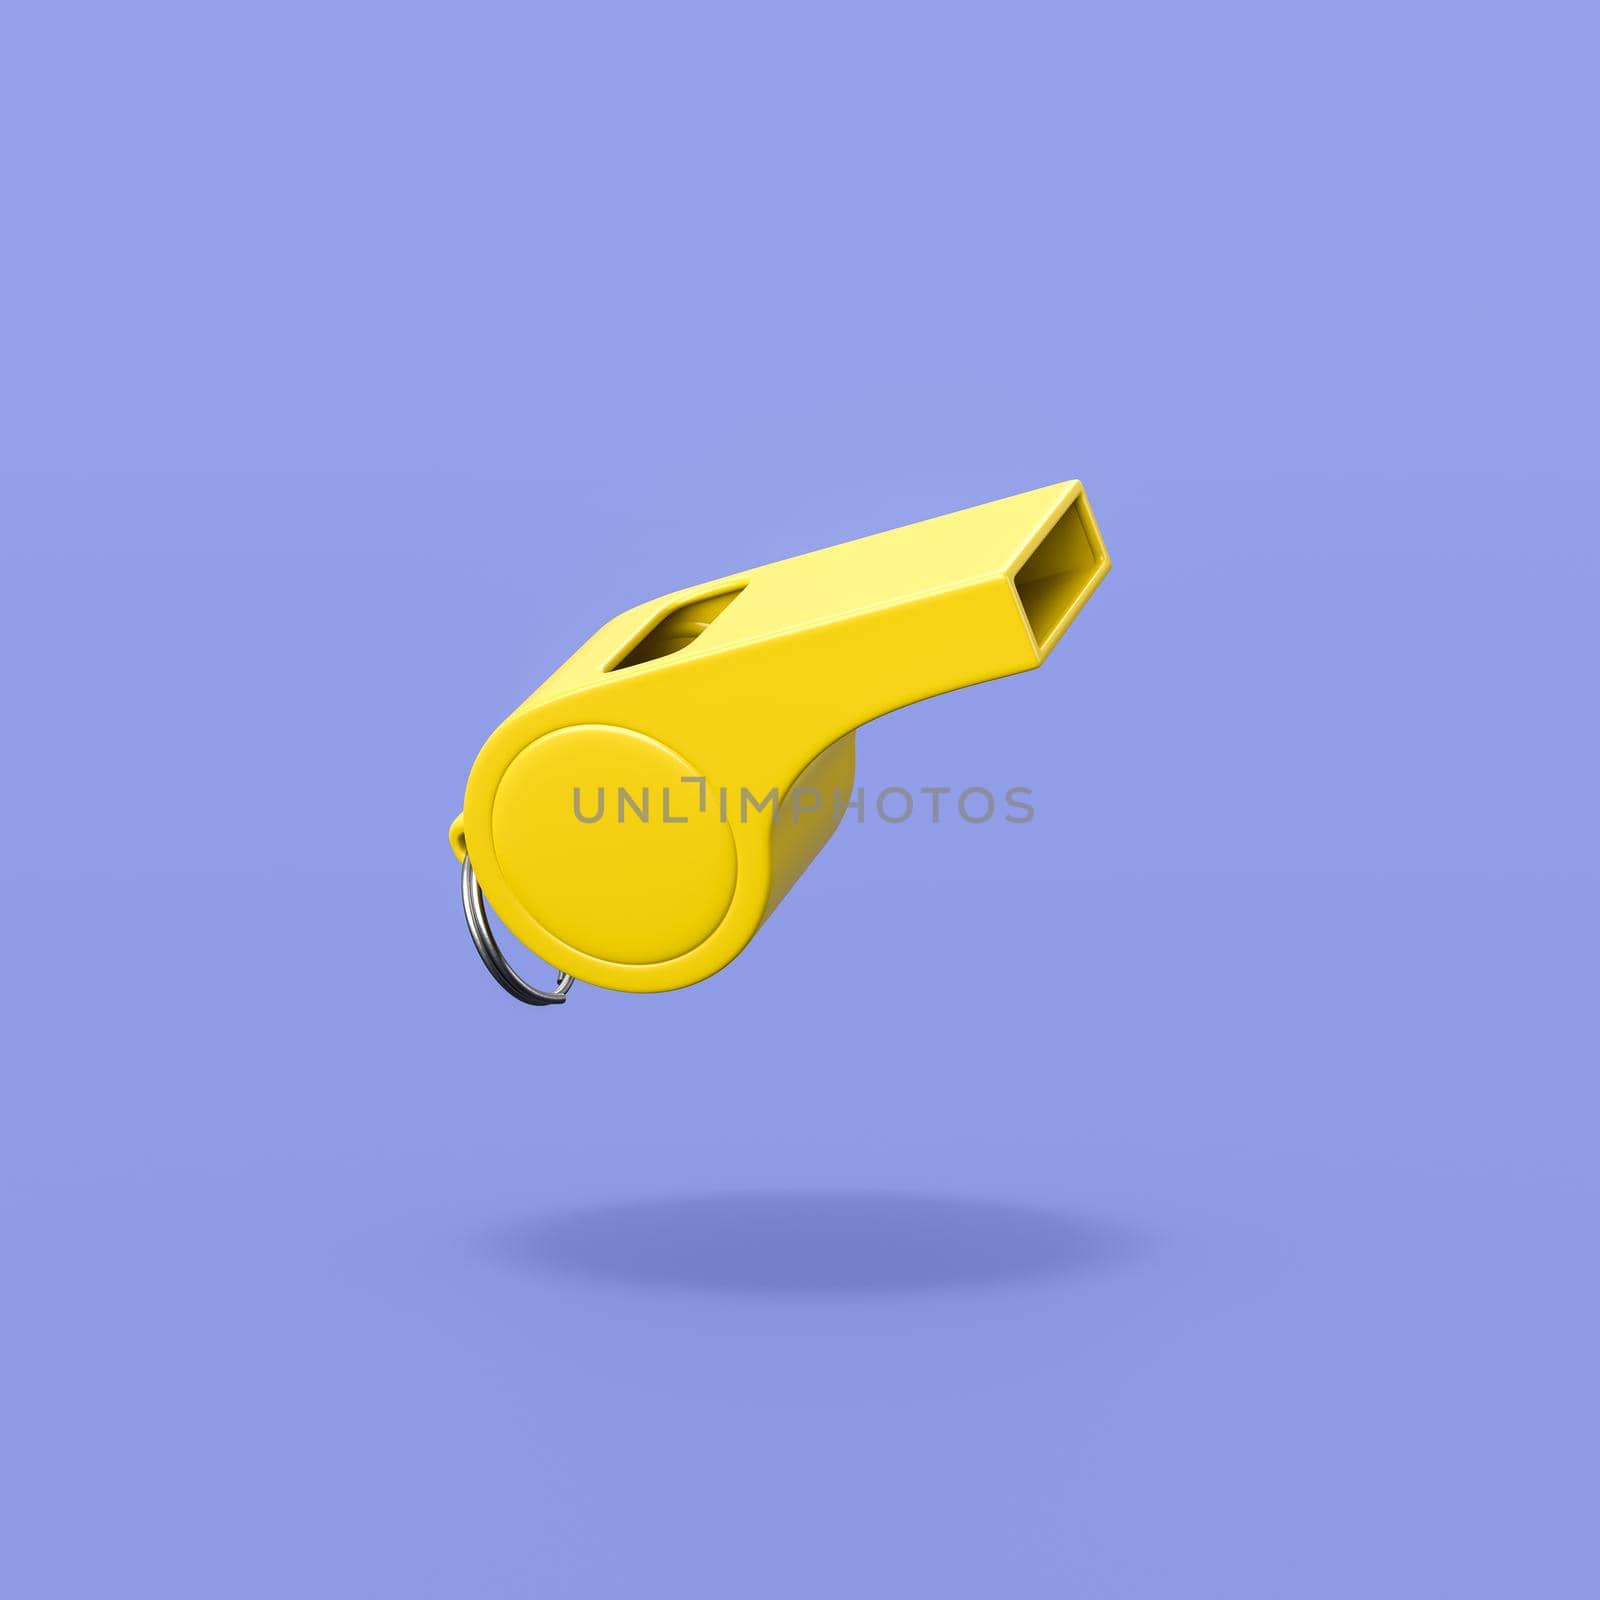 Yellow Plastic Whistle Isolated on Flat Blue Background with Shadow 3D Illustration